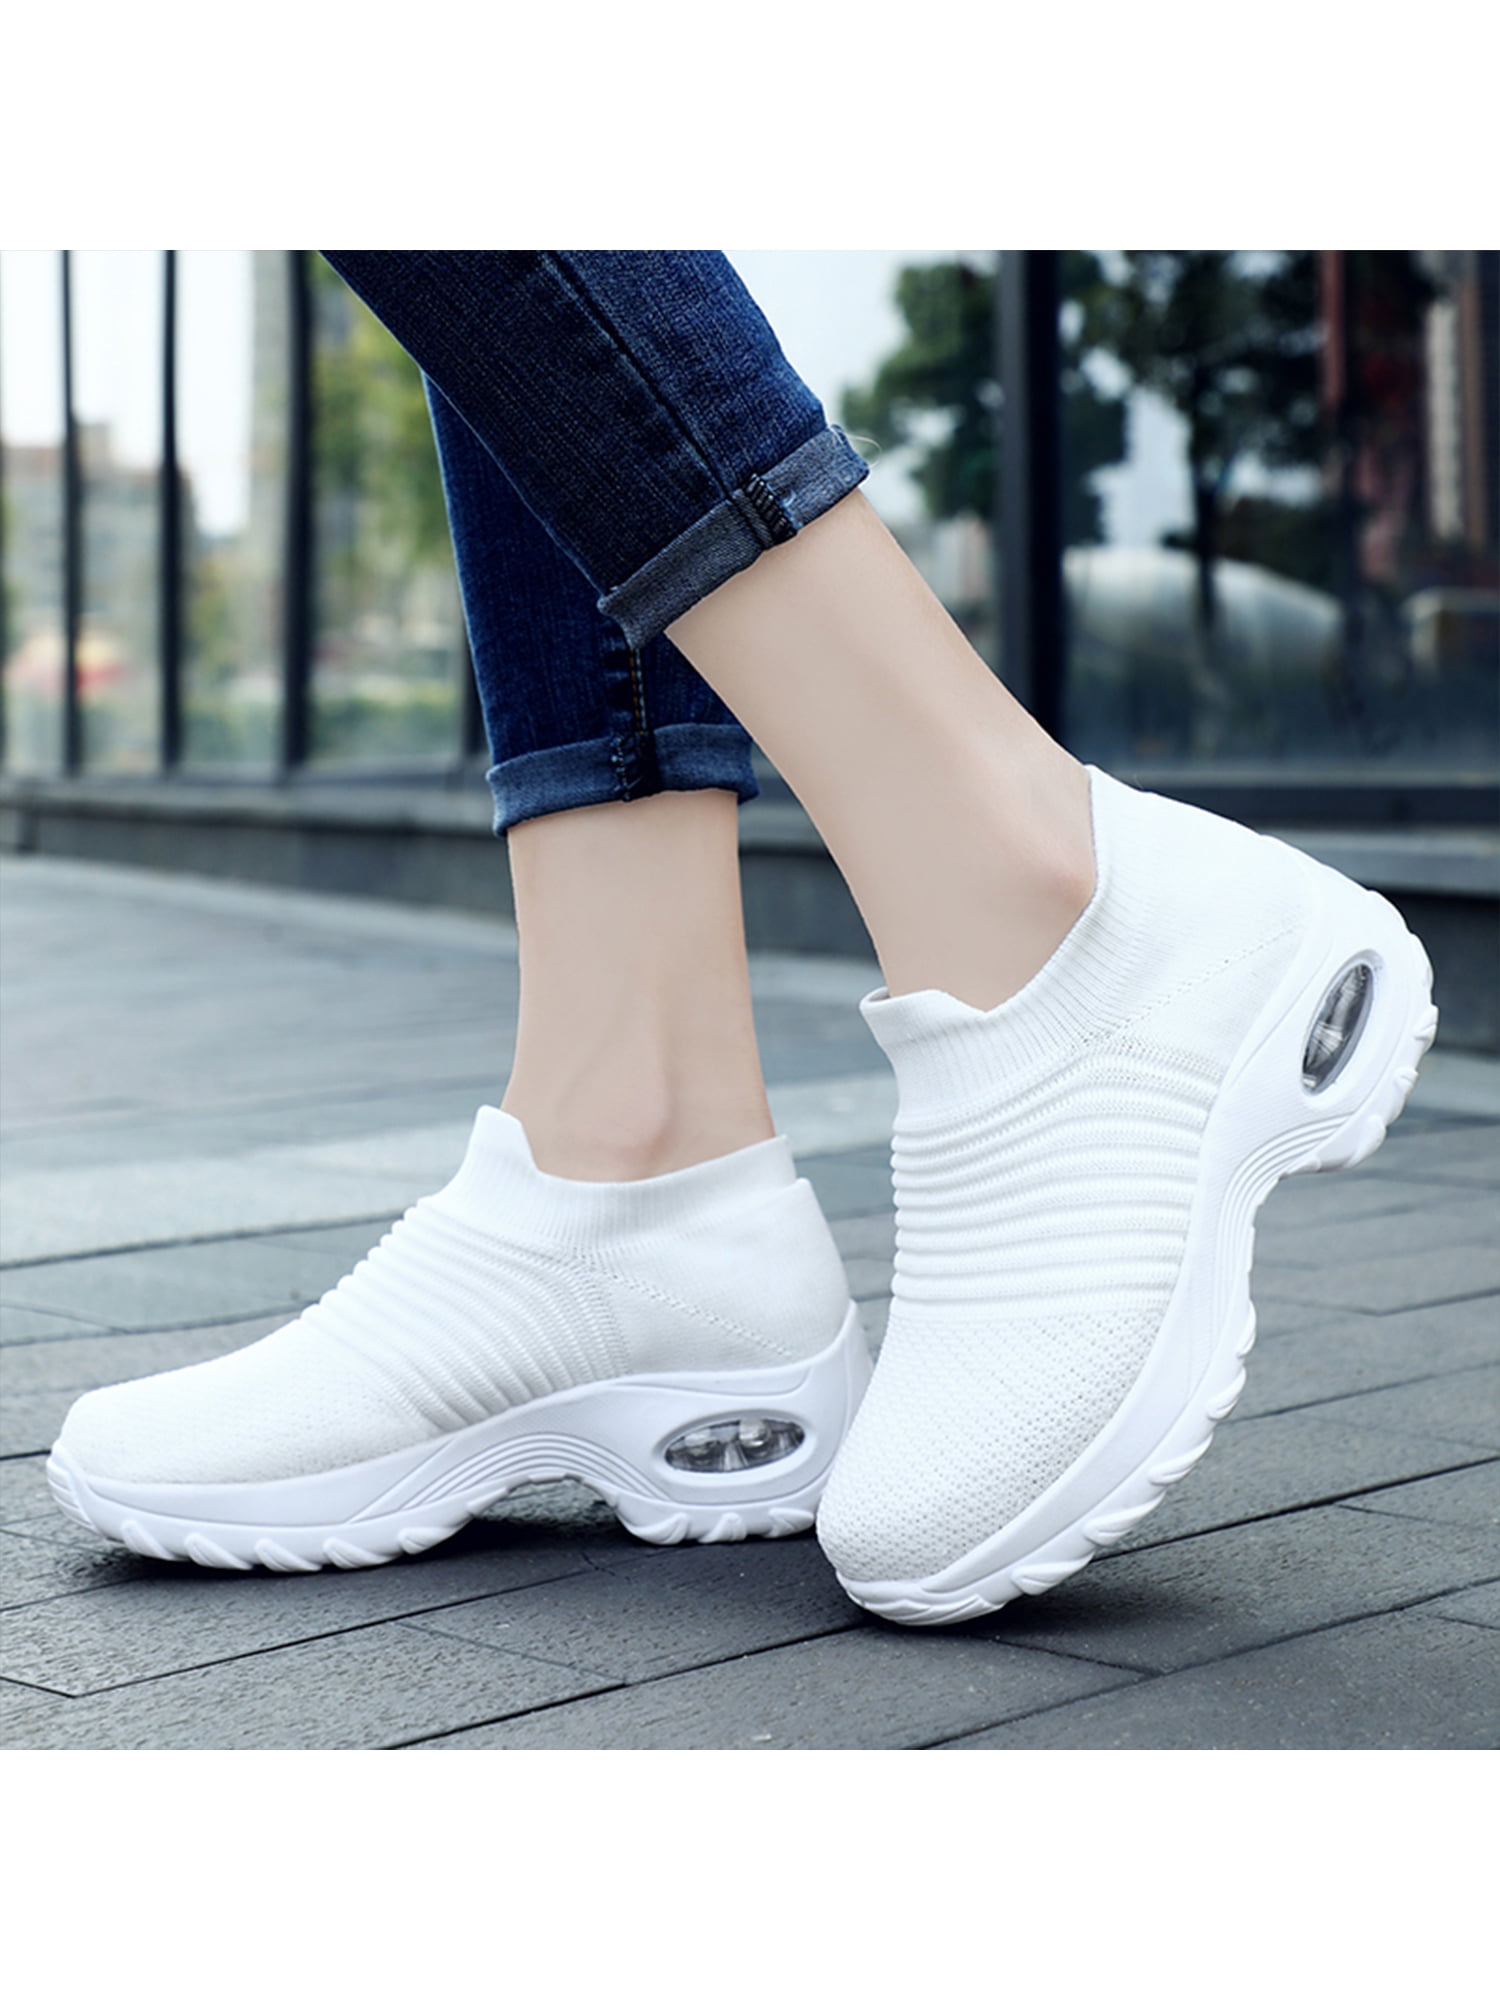 Women Shoes Ladies Slip On Sneakers Teen Girls School Shoes Comfortable Walking Shoes Lightweight Cushion Shoes Sport Running Trainers Casual Loafers